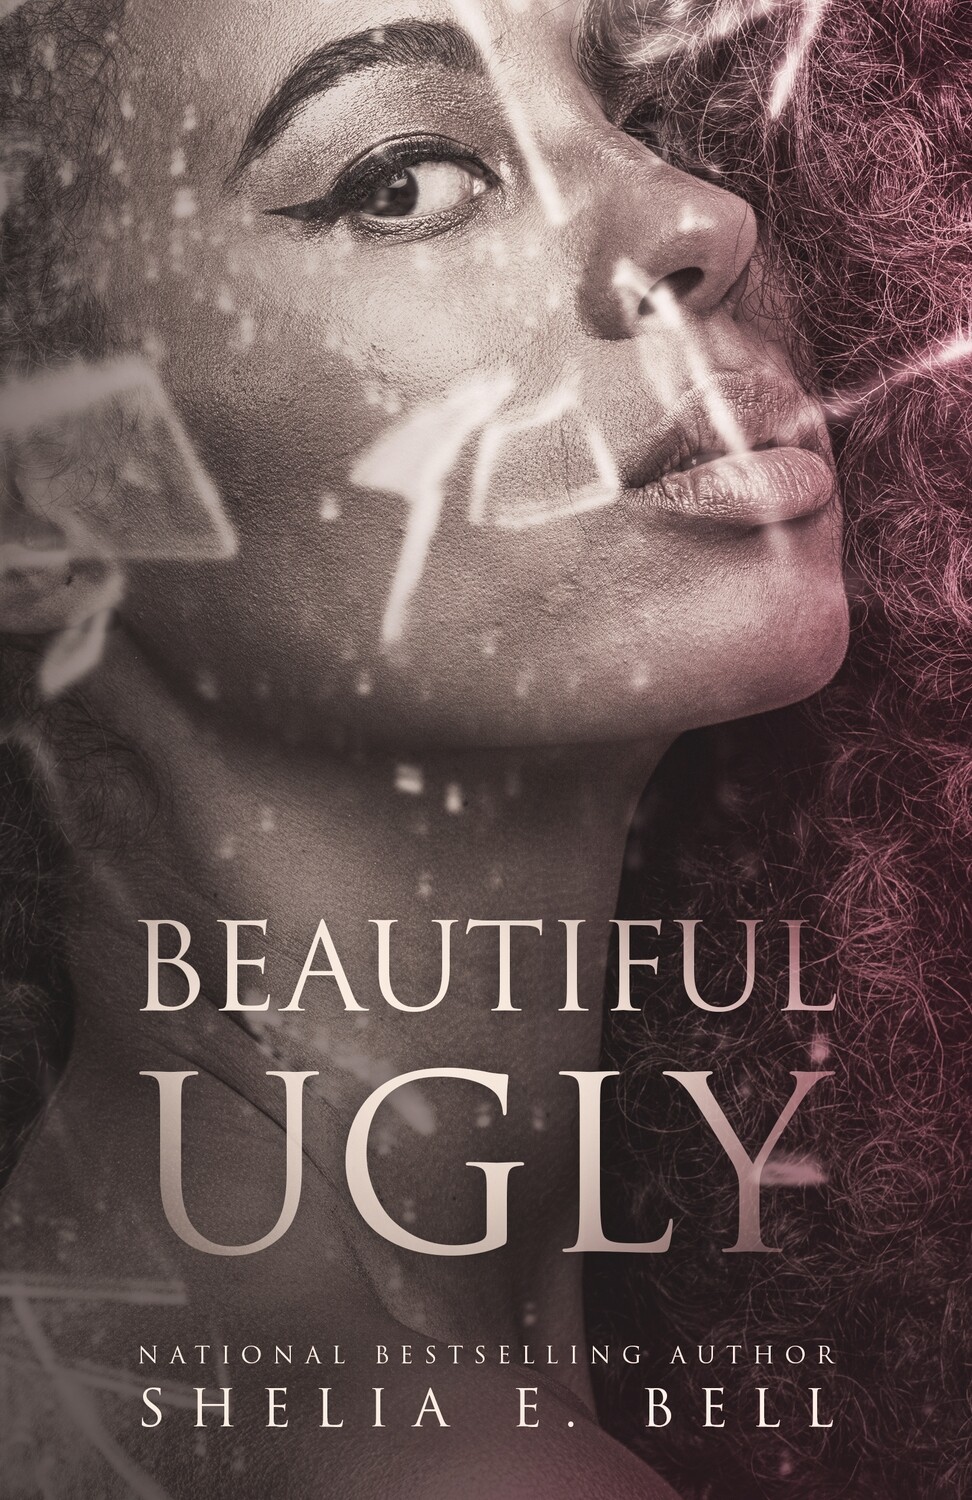 BEAUTIFUL UGLY (Book 1 of 2)